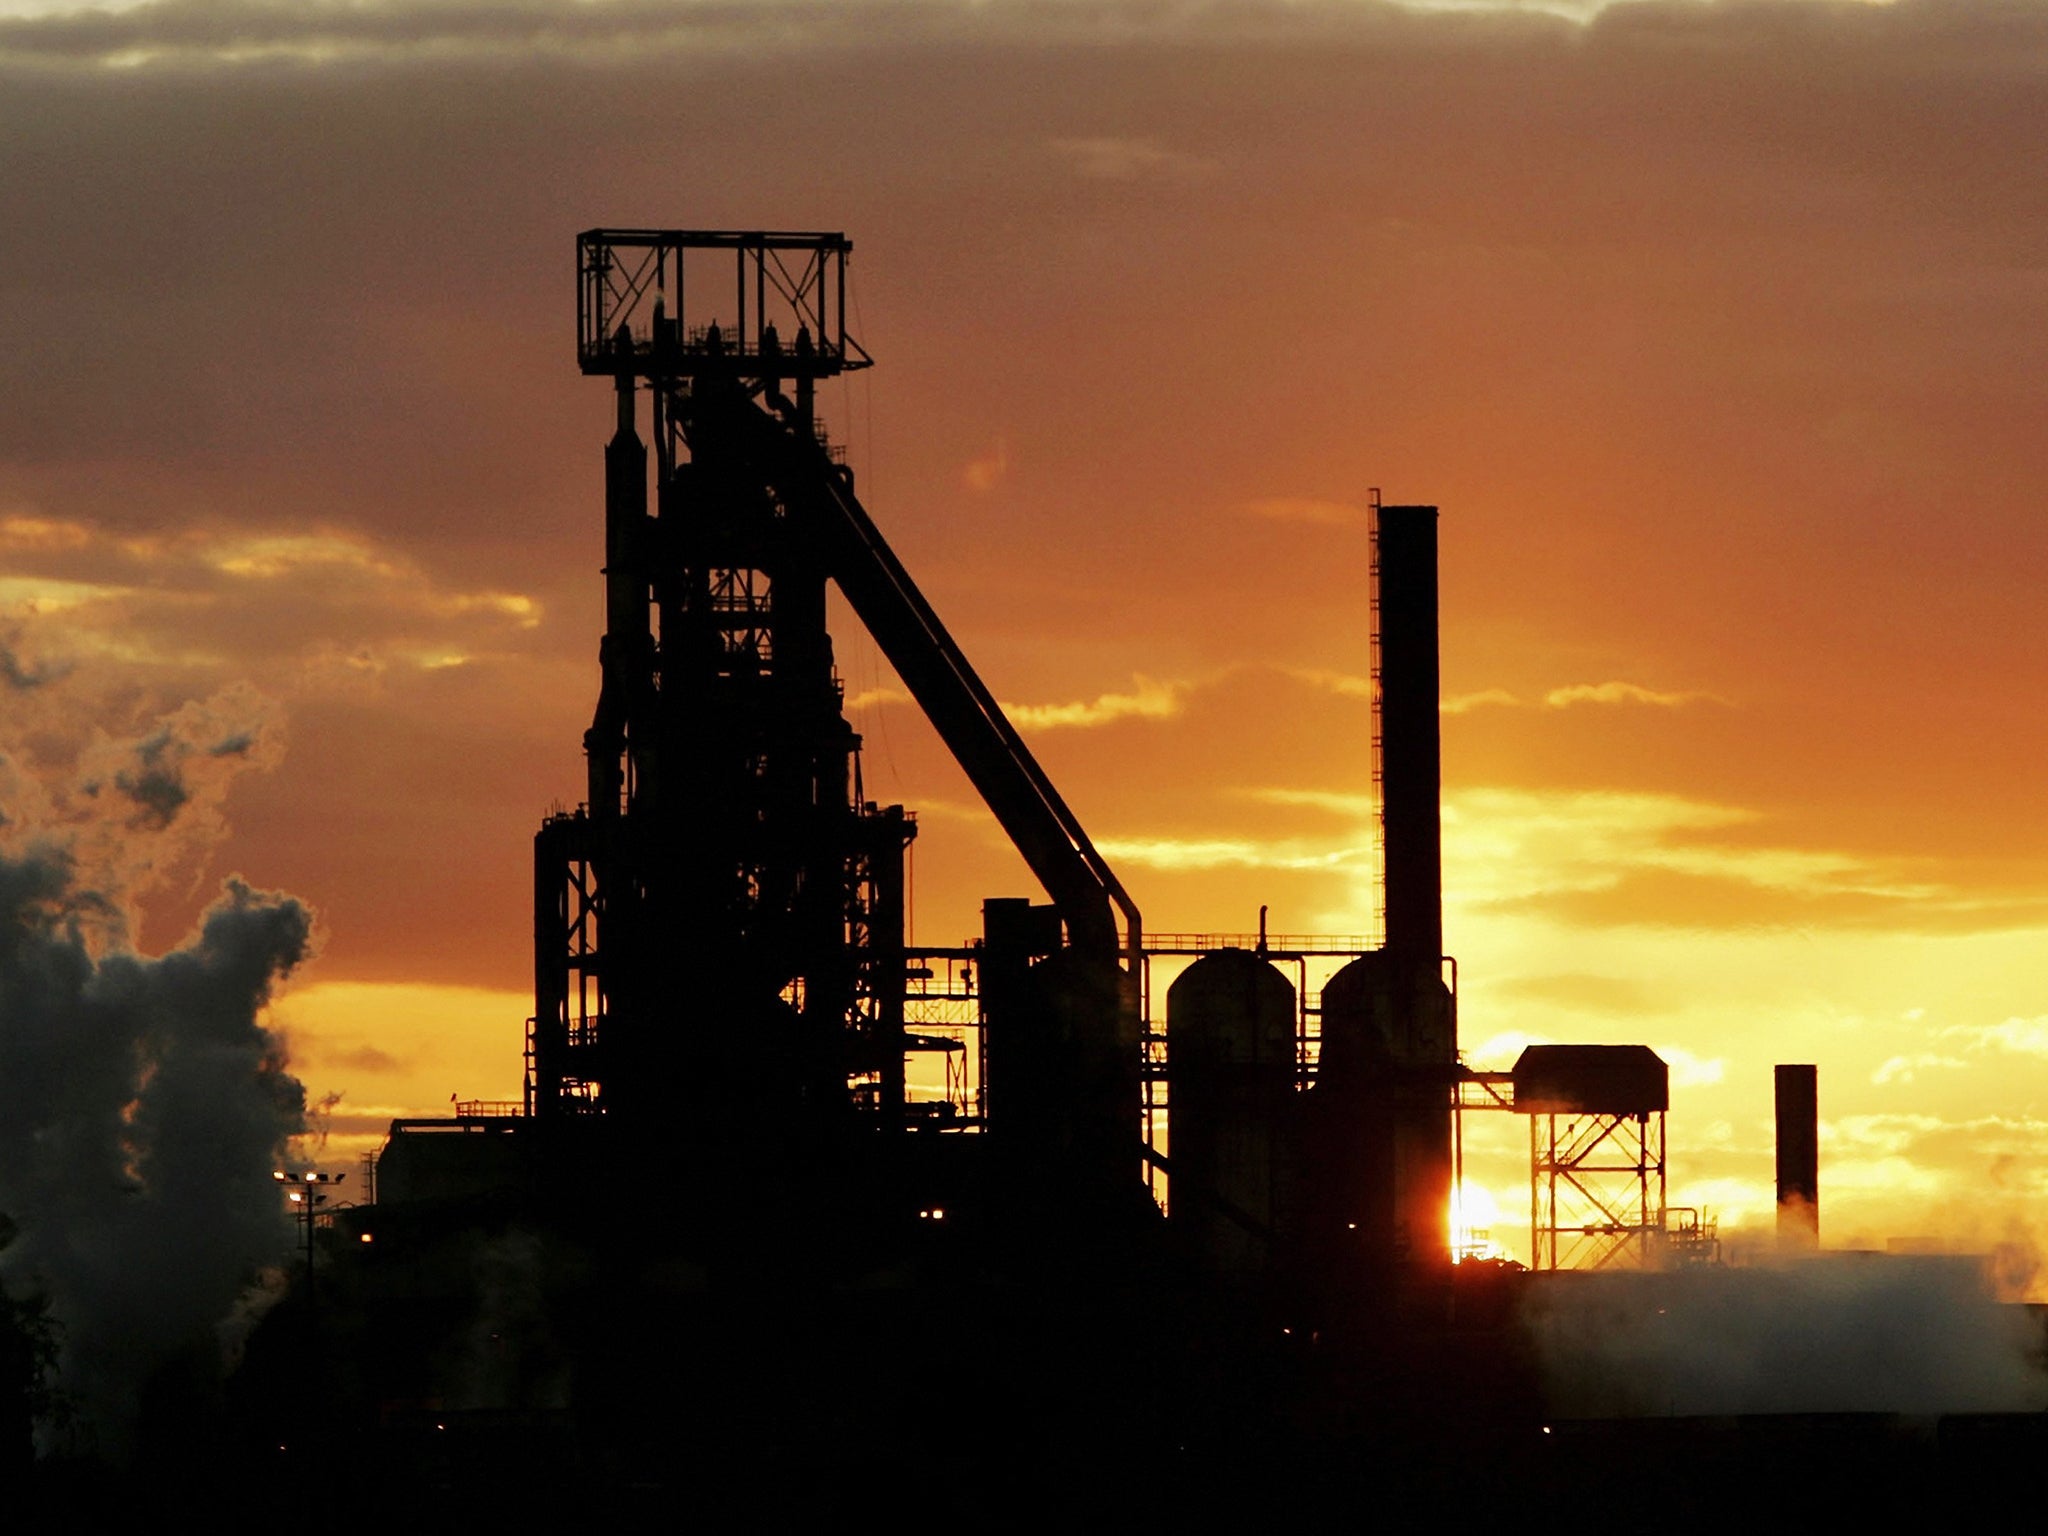 In 2006, the Anglo-Dutch steel firm Corus accepted a takeover offer from Indian rival Tata Steel, affecting several UK sites including the Port Talbot one pictured here